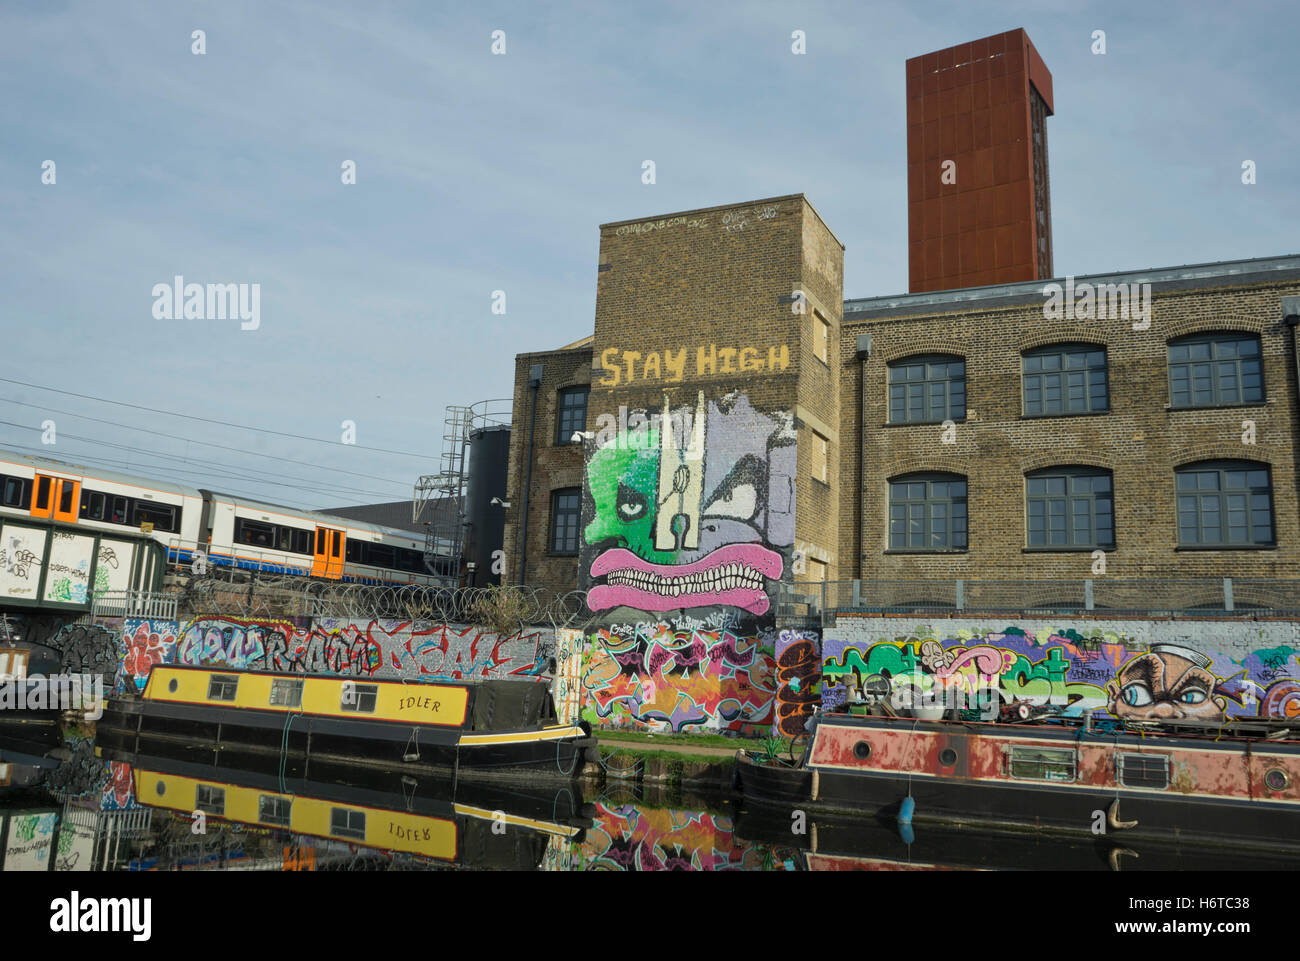 Overground train drives past canal by artists studios and warehouses in Hackney Wick, which construction companies are threatening with eviction for development of new buildings and offices. London.UK Stock Photo